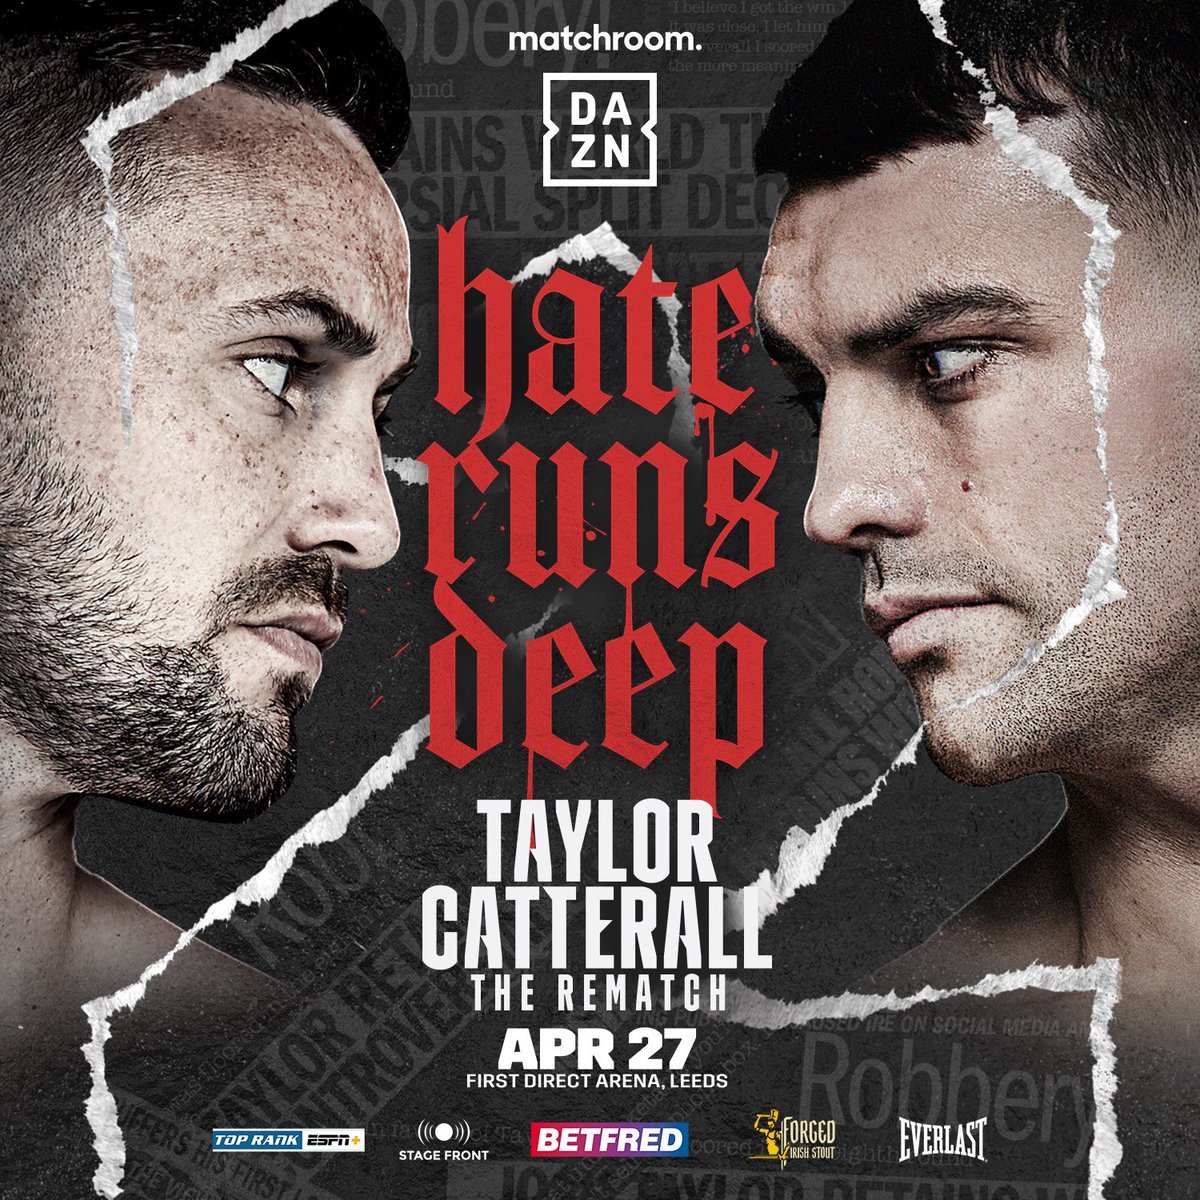 Imagine being asking for two years when the rematch is. Well I can tell you now! April 27th 🗓 First direct Arena 📍 Leeds 🌍 No excuses now @JoshTaylorBoxer REDEMPTION @MatchroomBoxing @DAZNBoxing #TaylorCatterall2 ‼️